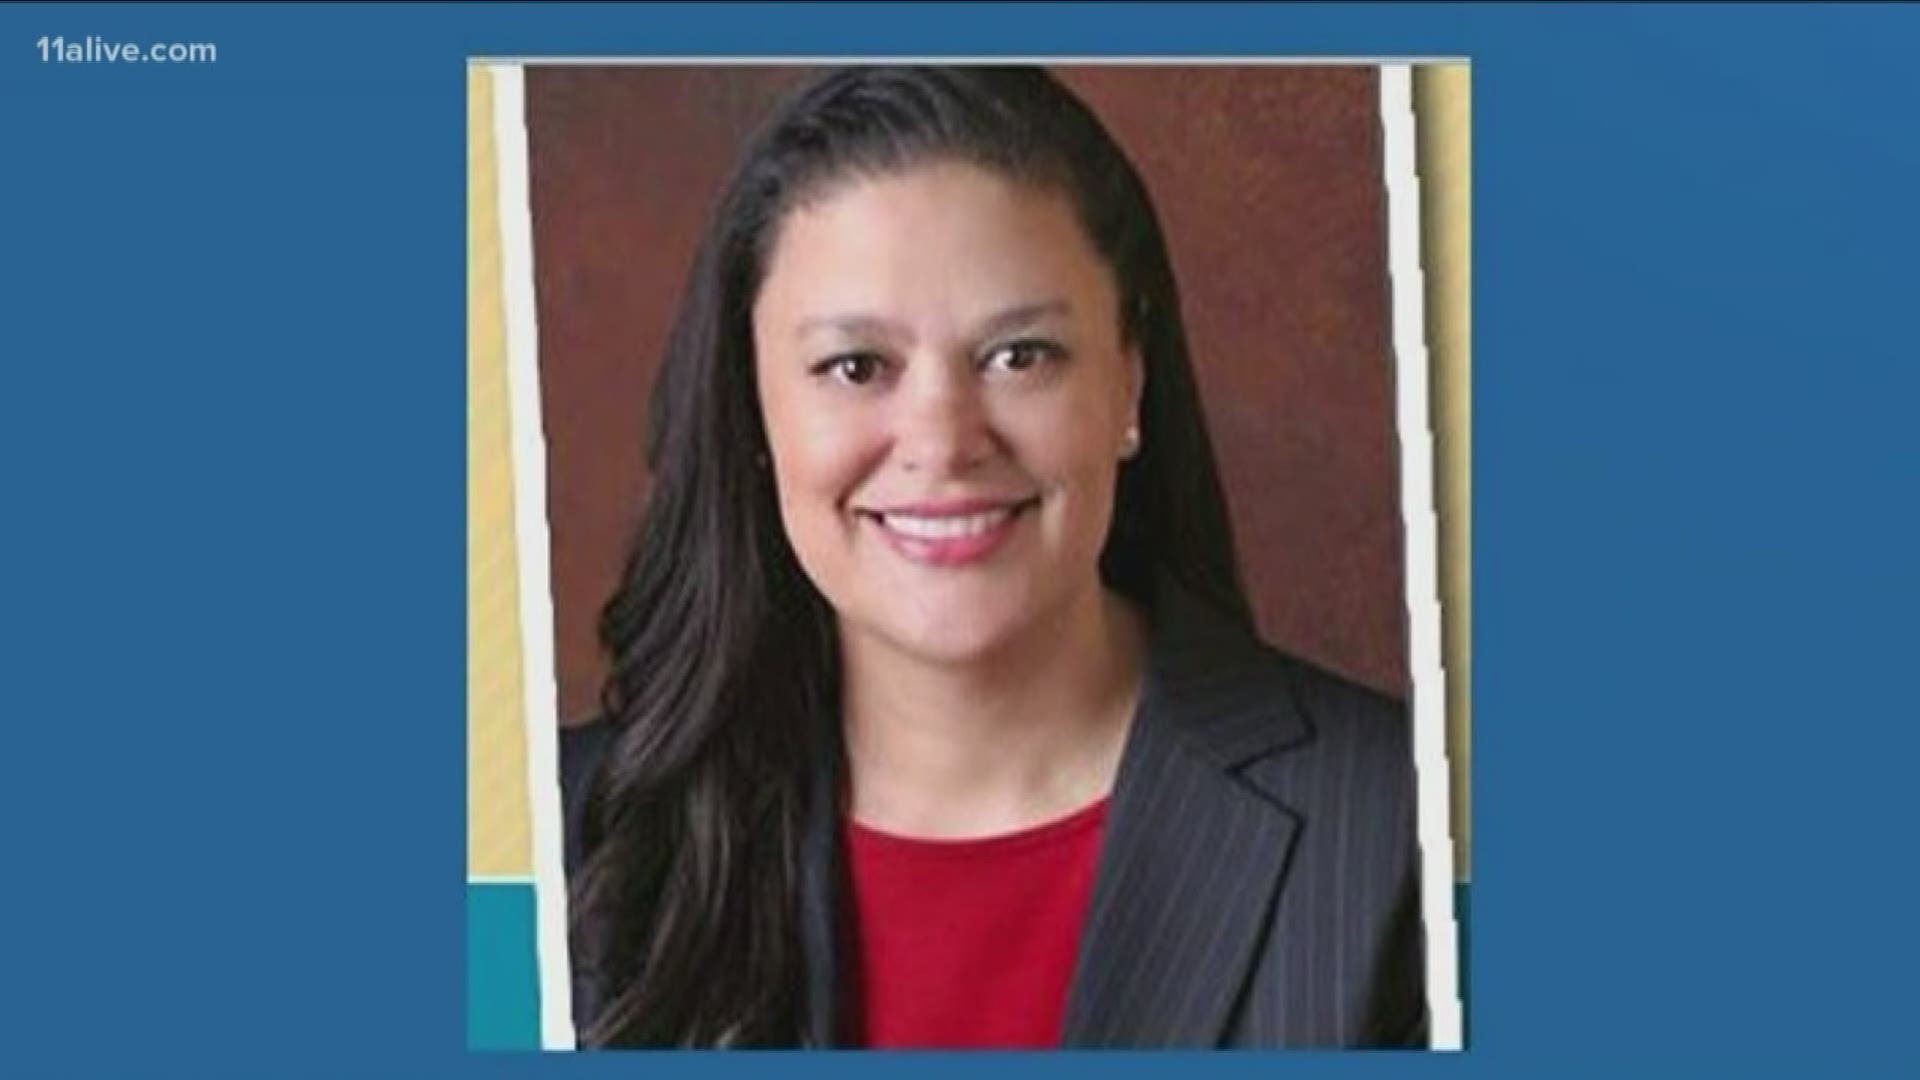 The Atlanta Public Schools board decided they will not renew the contract of Superintendent Meria Carstarphen when it expires on June 30.